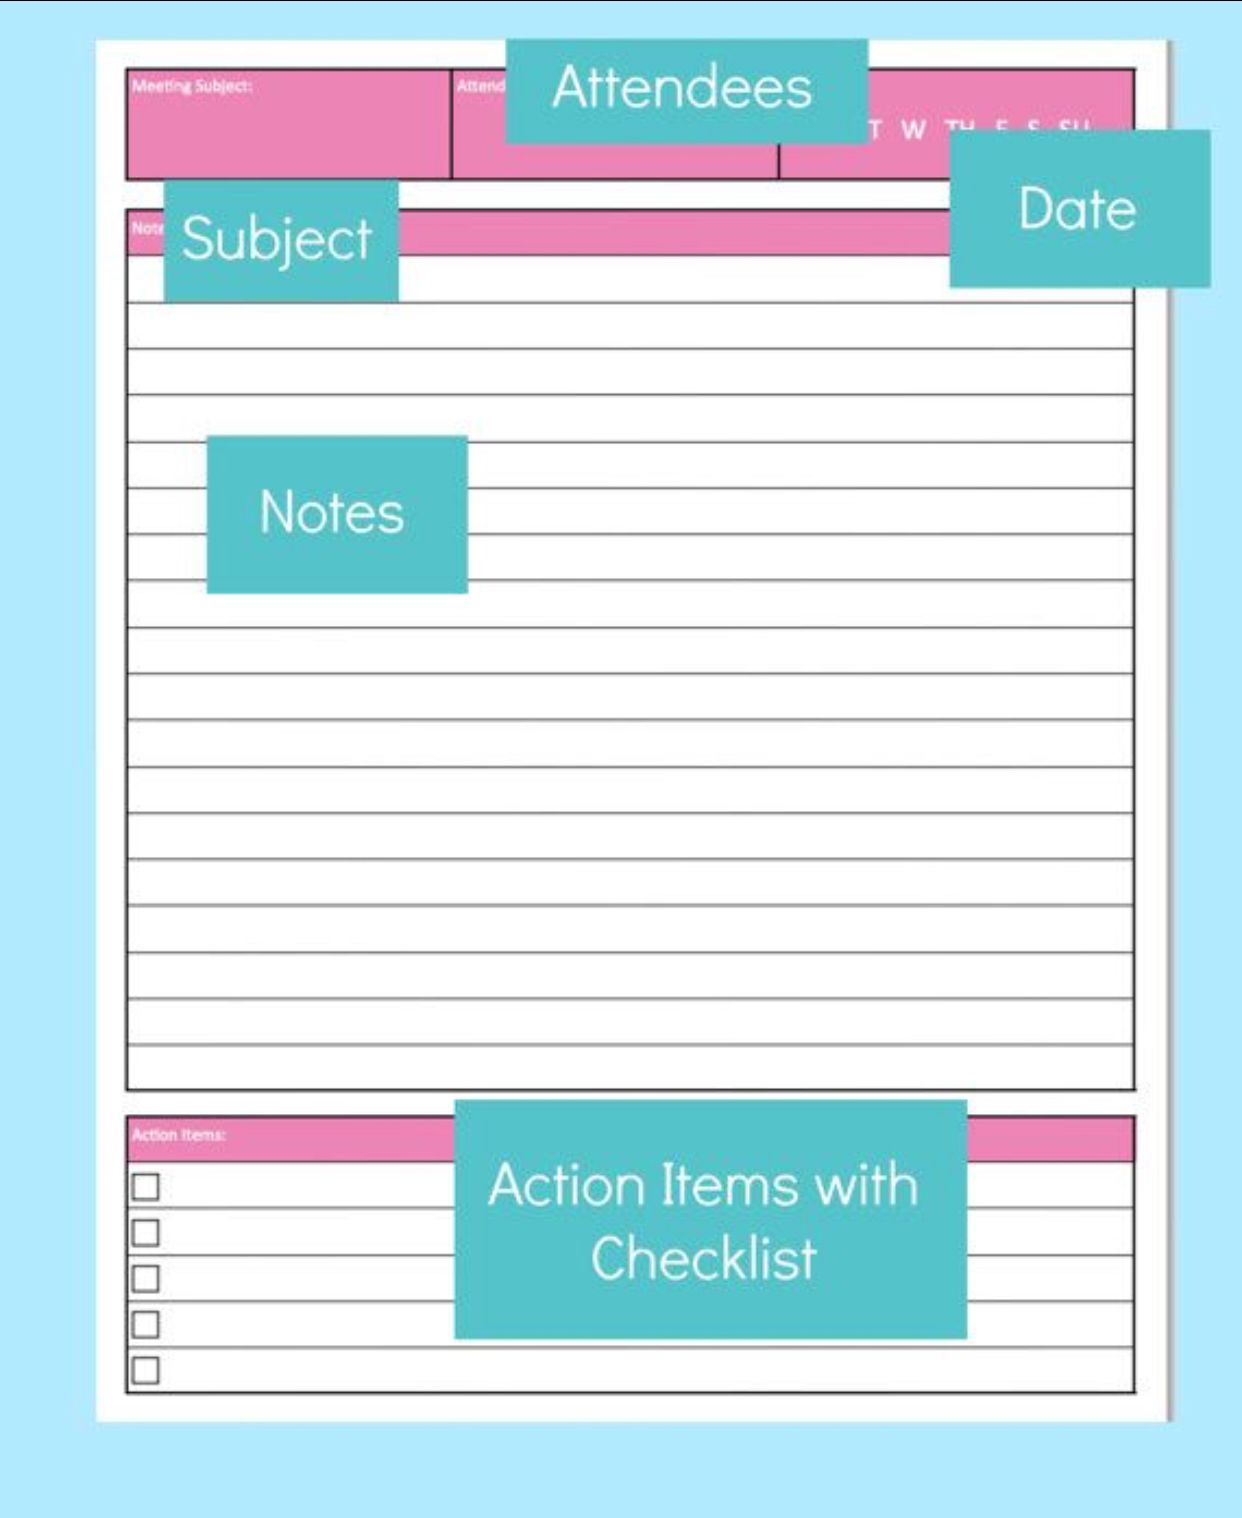 Note taking templates for meetings I would Rocketbook